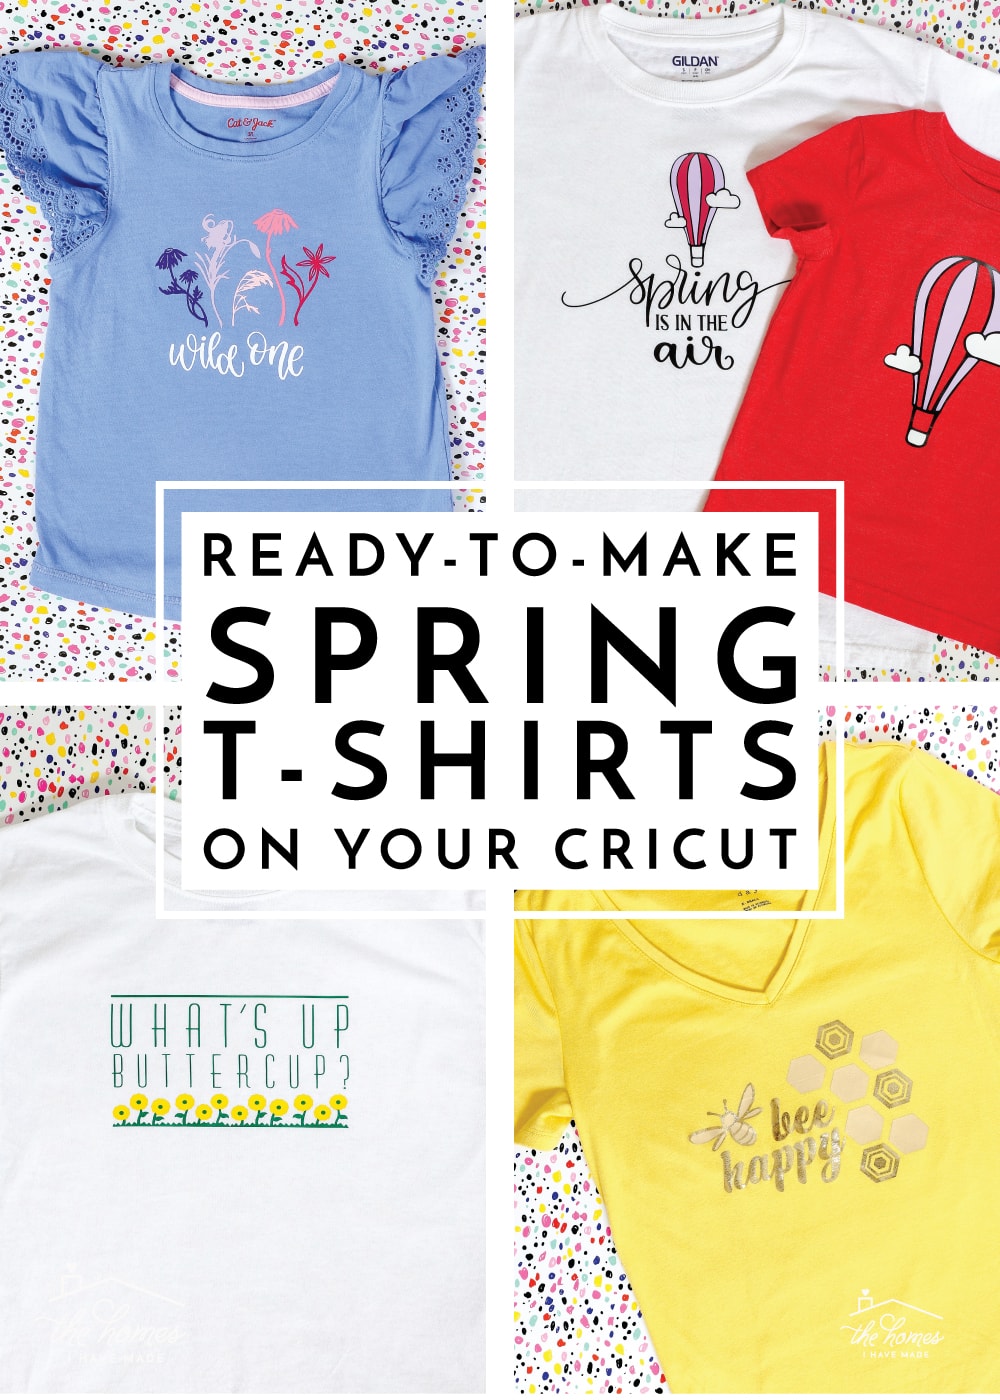 Get up and running quickly on your Cricut machine with easy Ready-to-Make projects - this tutorial shows you exactly how to do it!